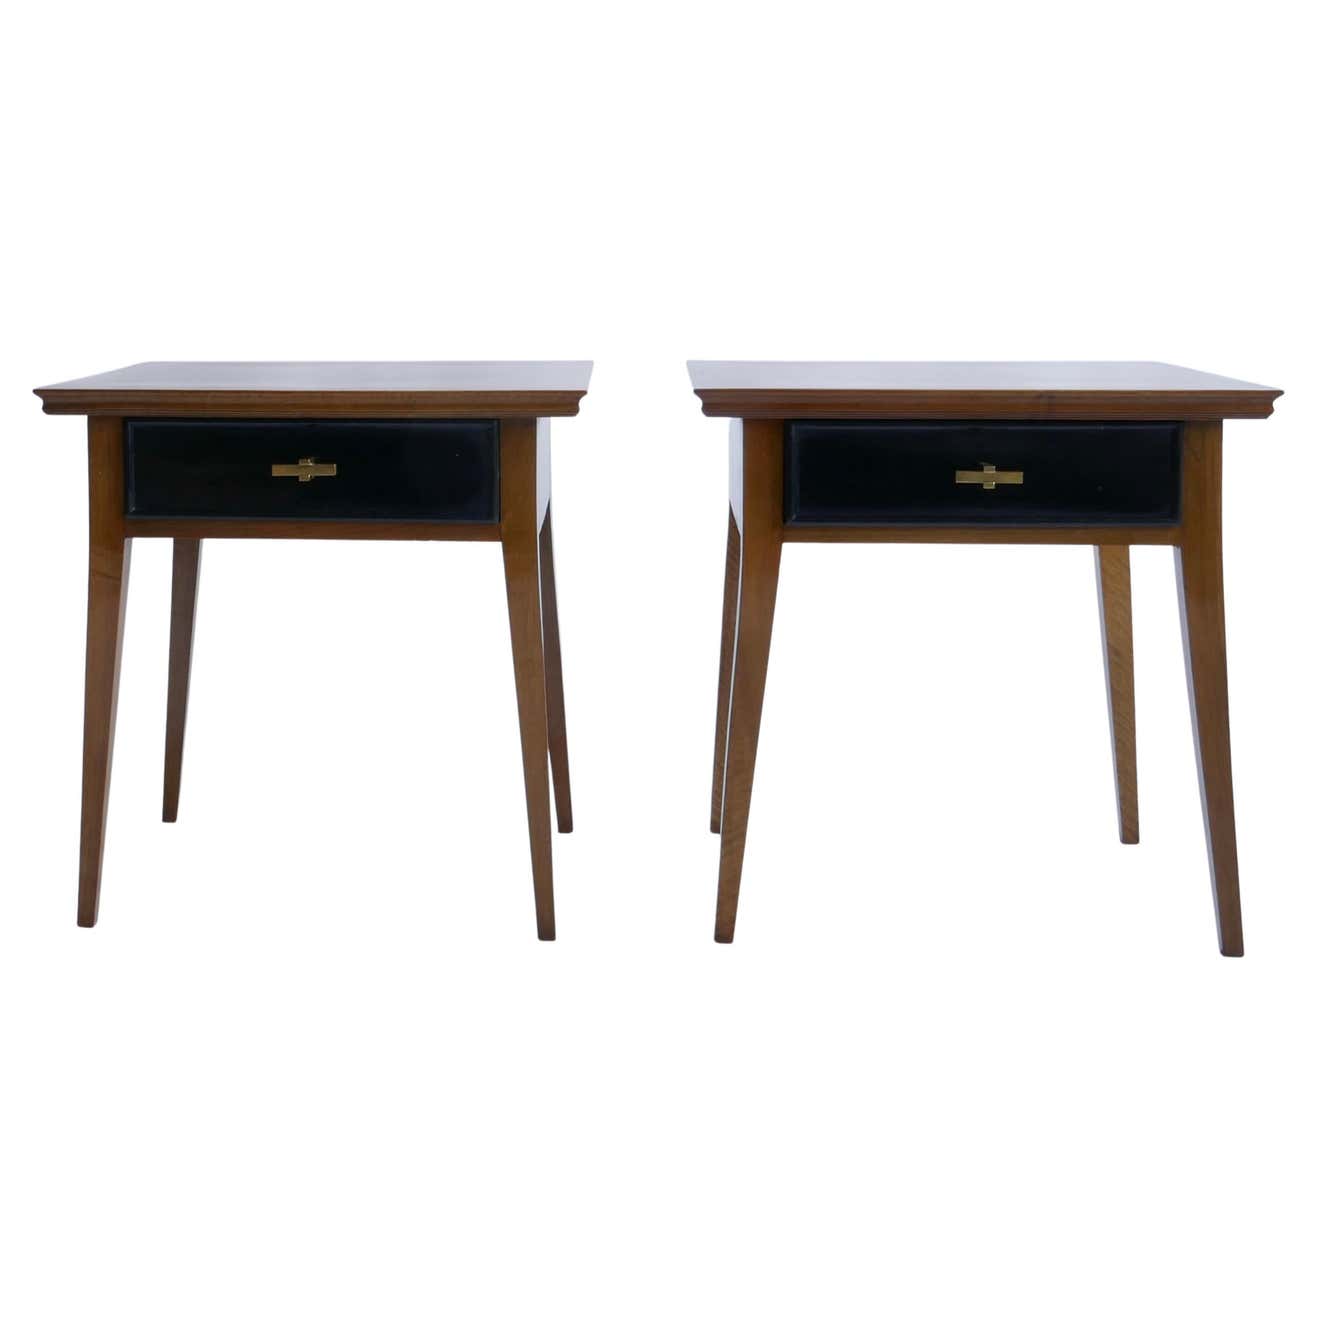 Sold - Pair of Mahogany Wood Bed Side Tables with Brass Handles, Italy, 1960s